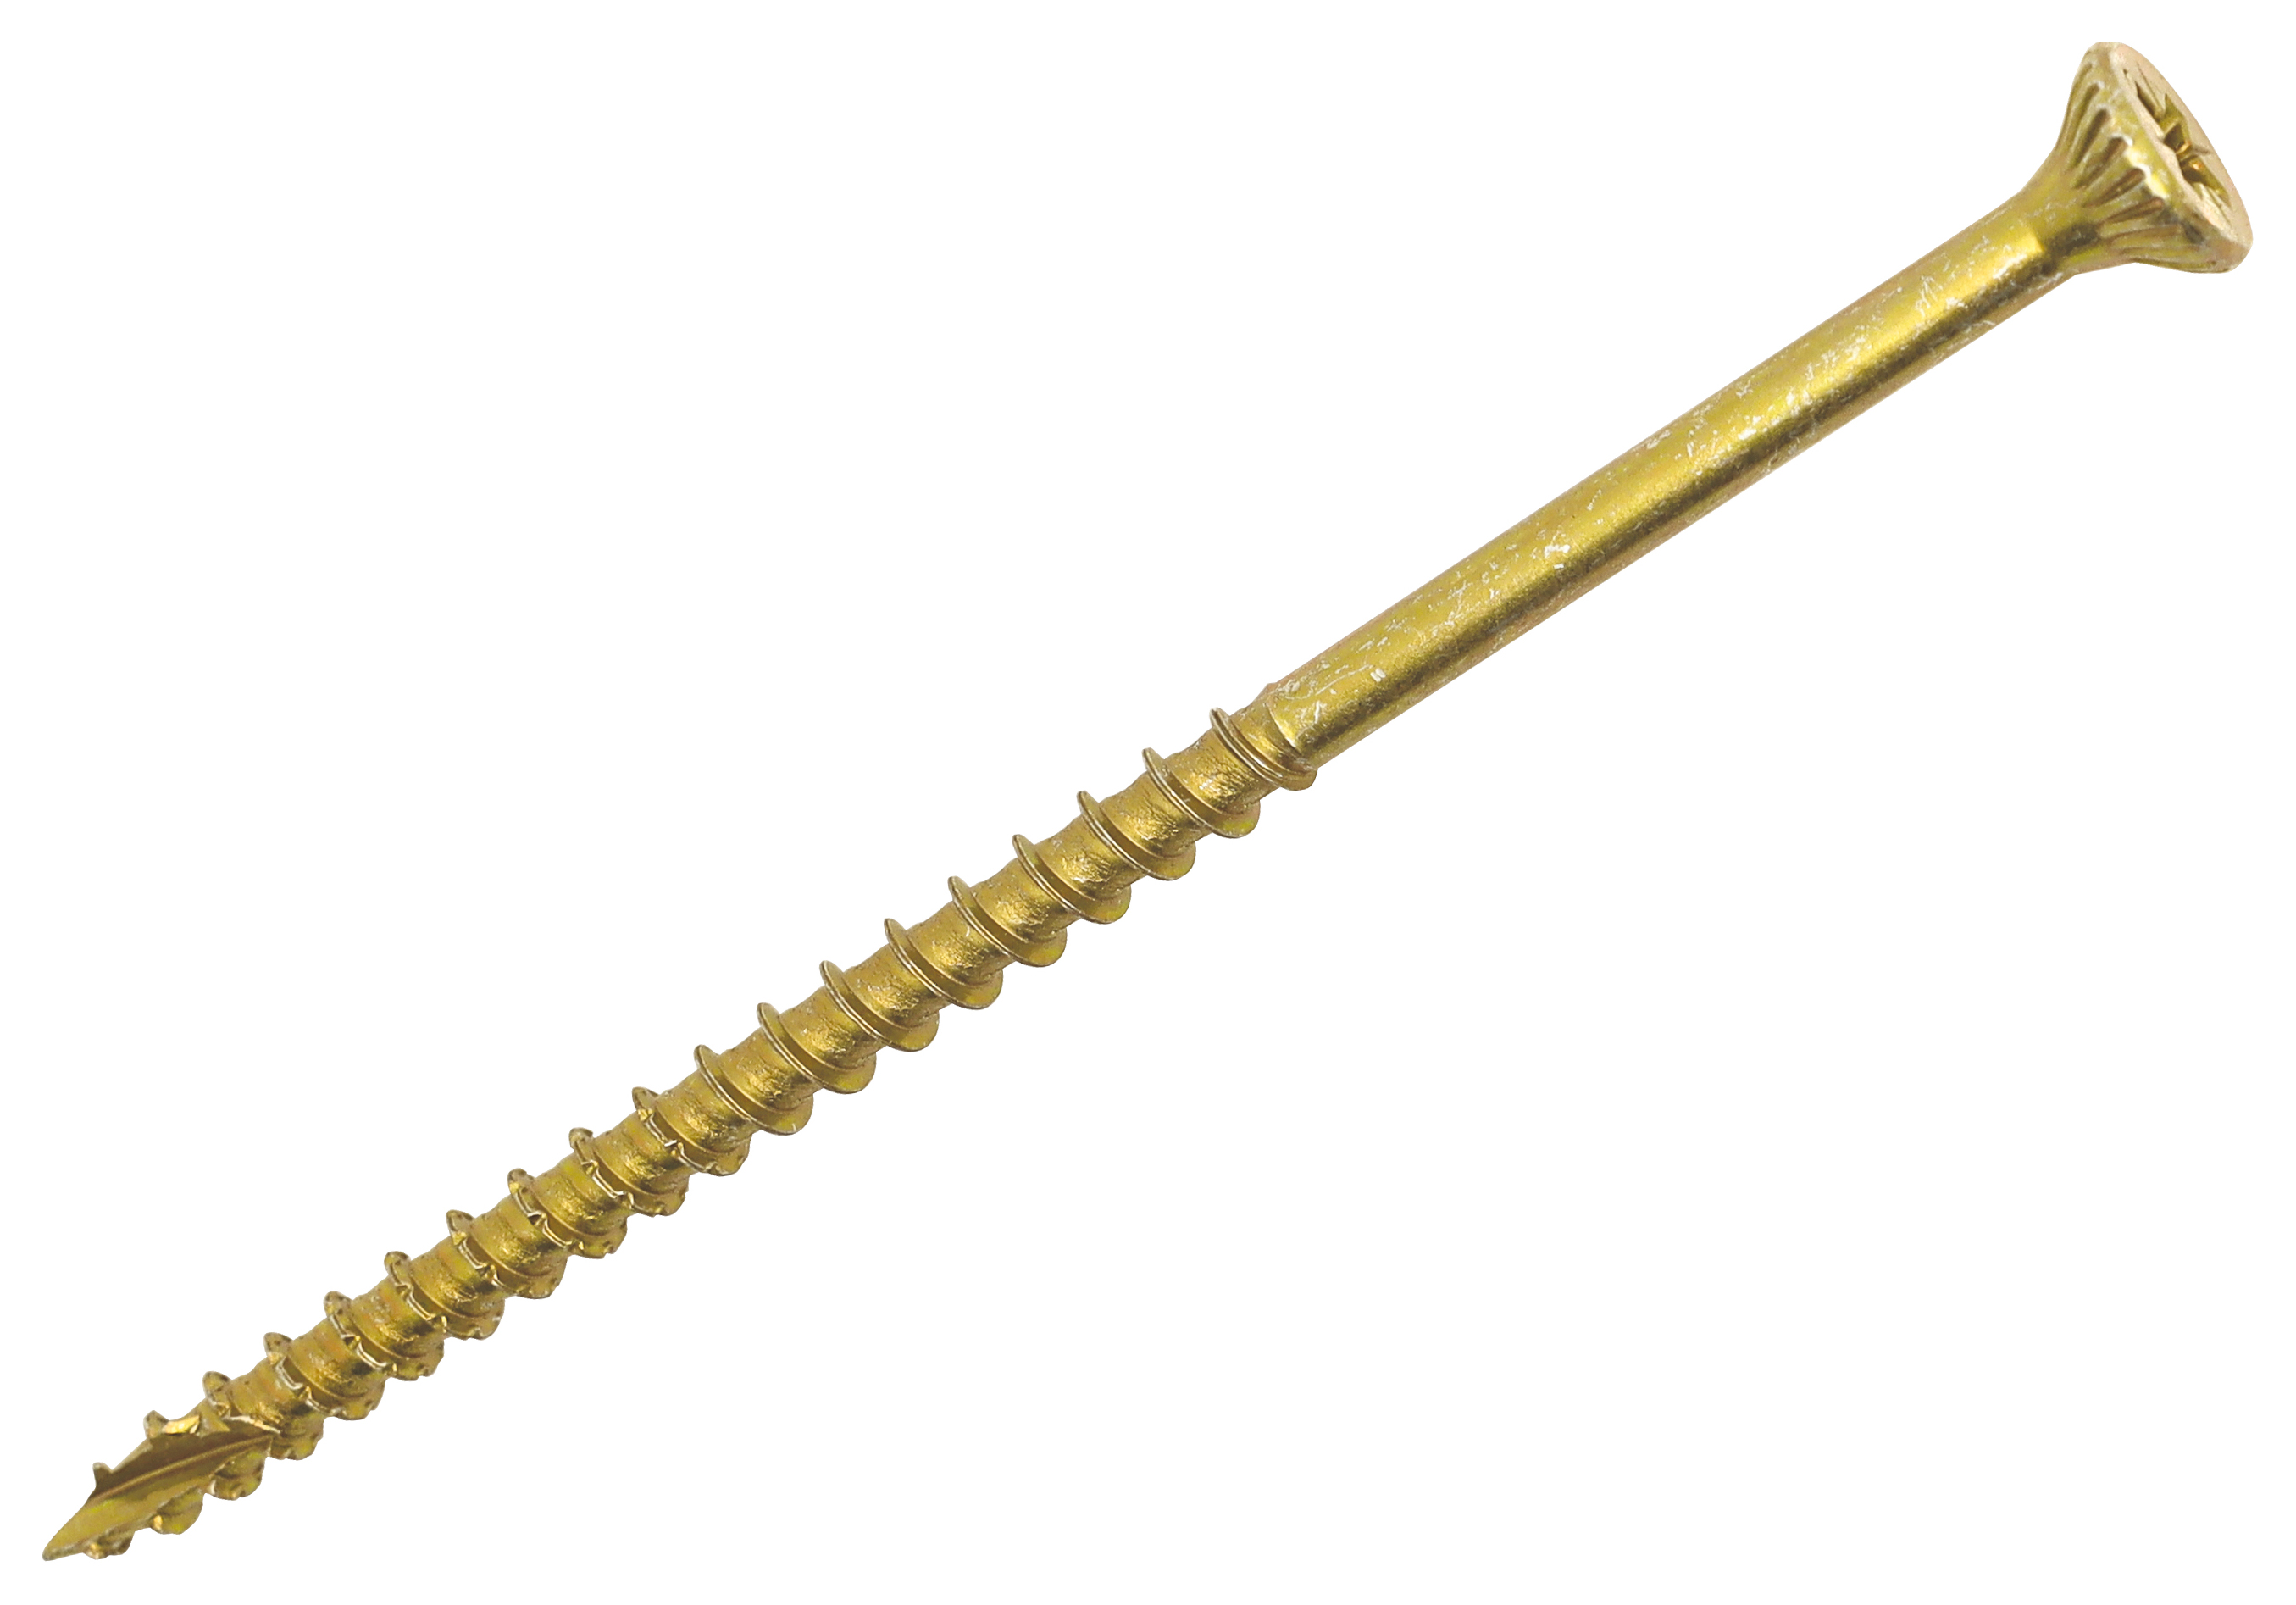 Image of Optimaxx PZ Countersunk Passivated Double Reinforced Wood Screw Maxxtub - 5 x 100mm - Pack of 275